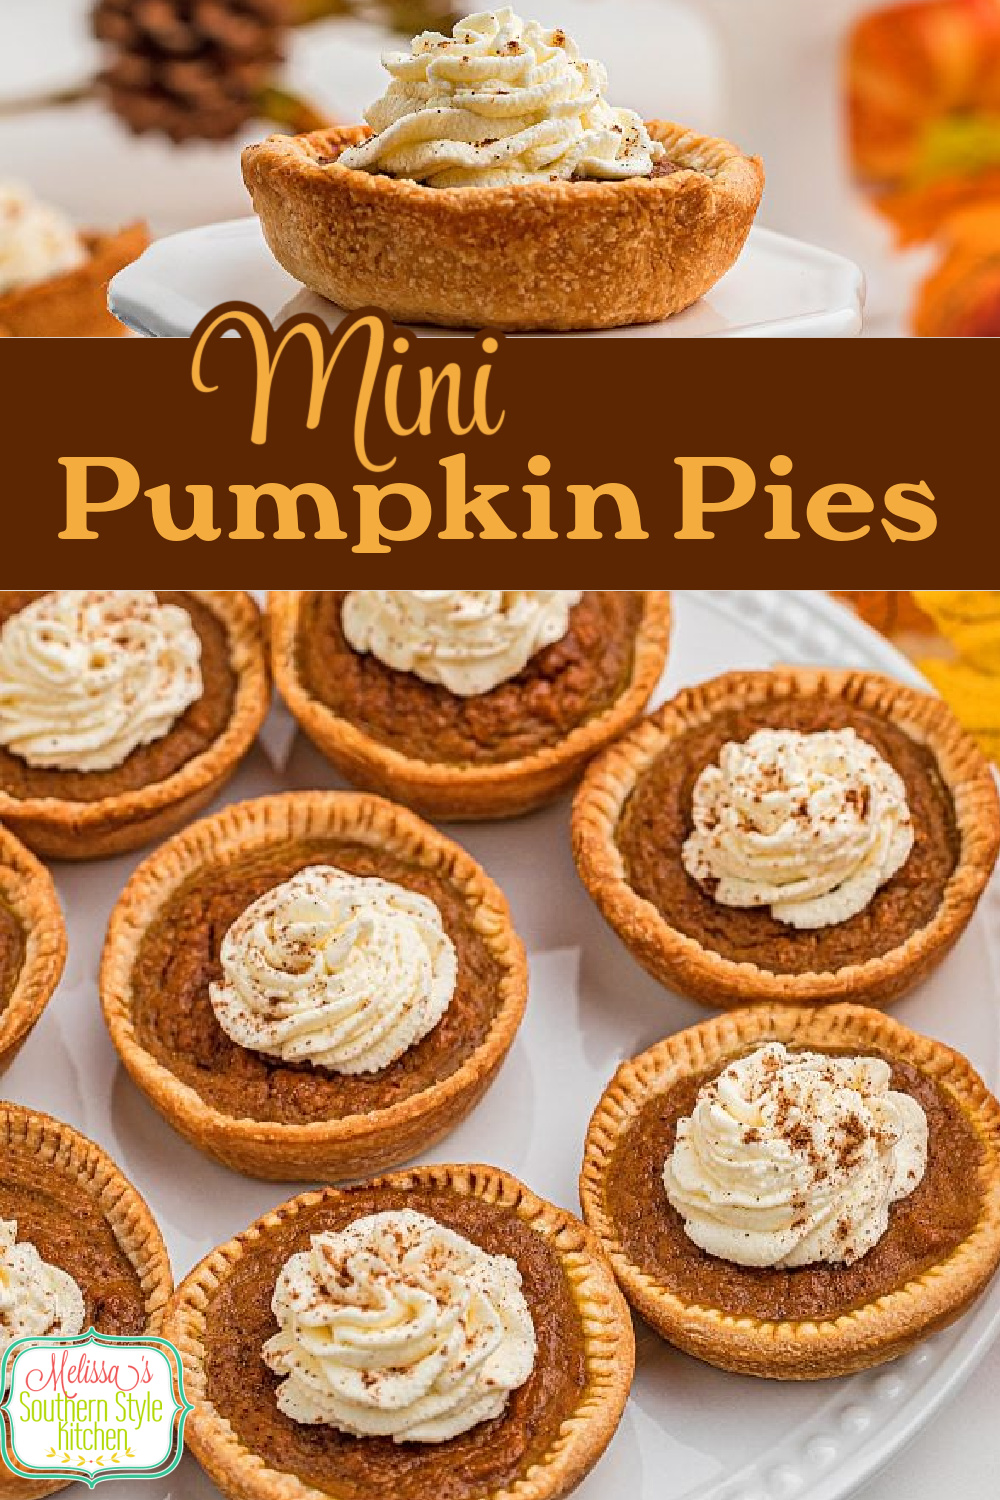 These Mini Pumpkin Pies are just the right size for those who like to sample all of the desserts on the holiday table #pumpkinpie #minipies #pumpkinpierecipes #muffinpanrecipes #thanksgivingdesserts #pie #southernpumpkinpie